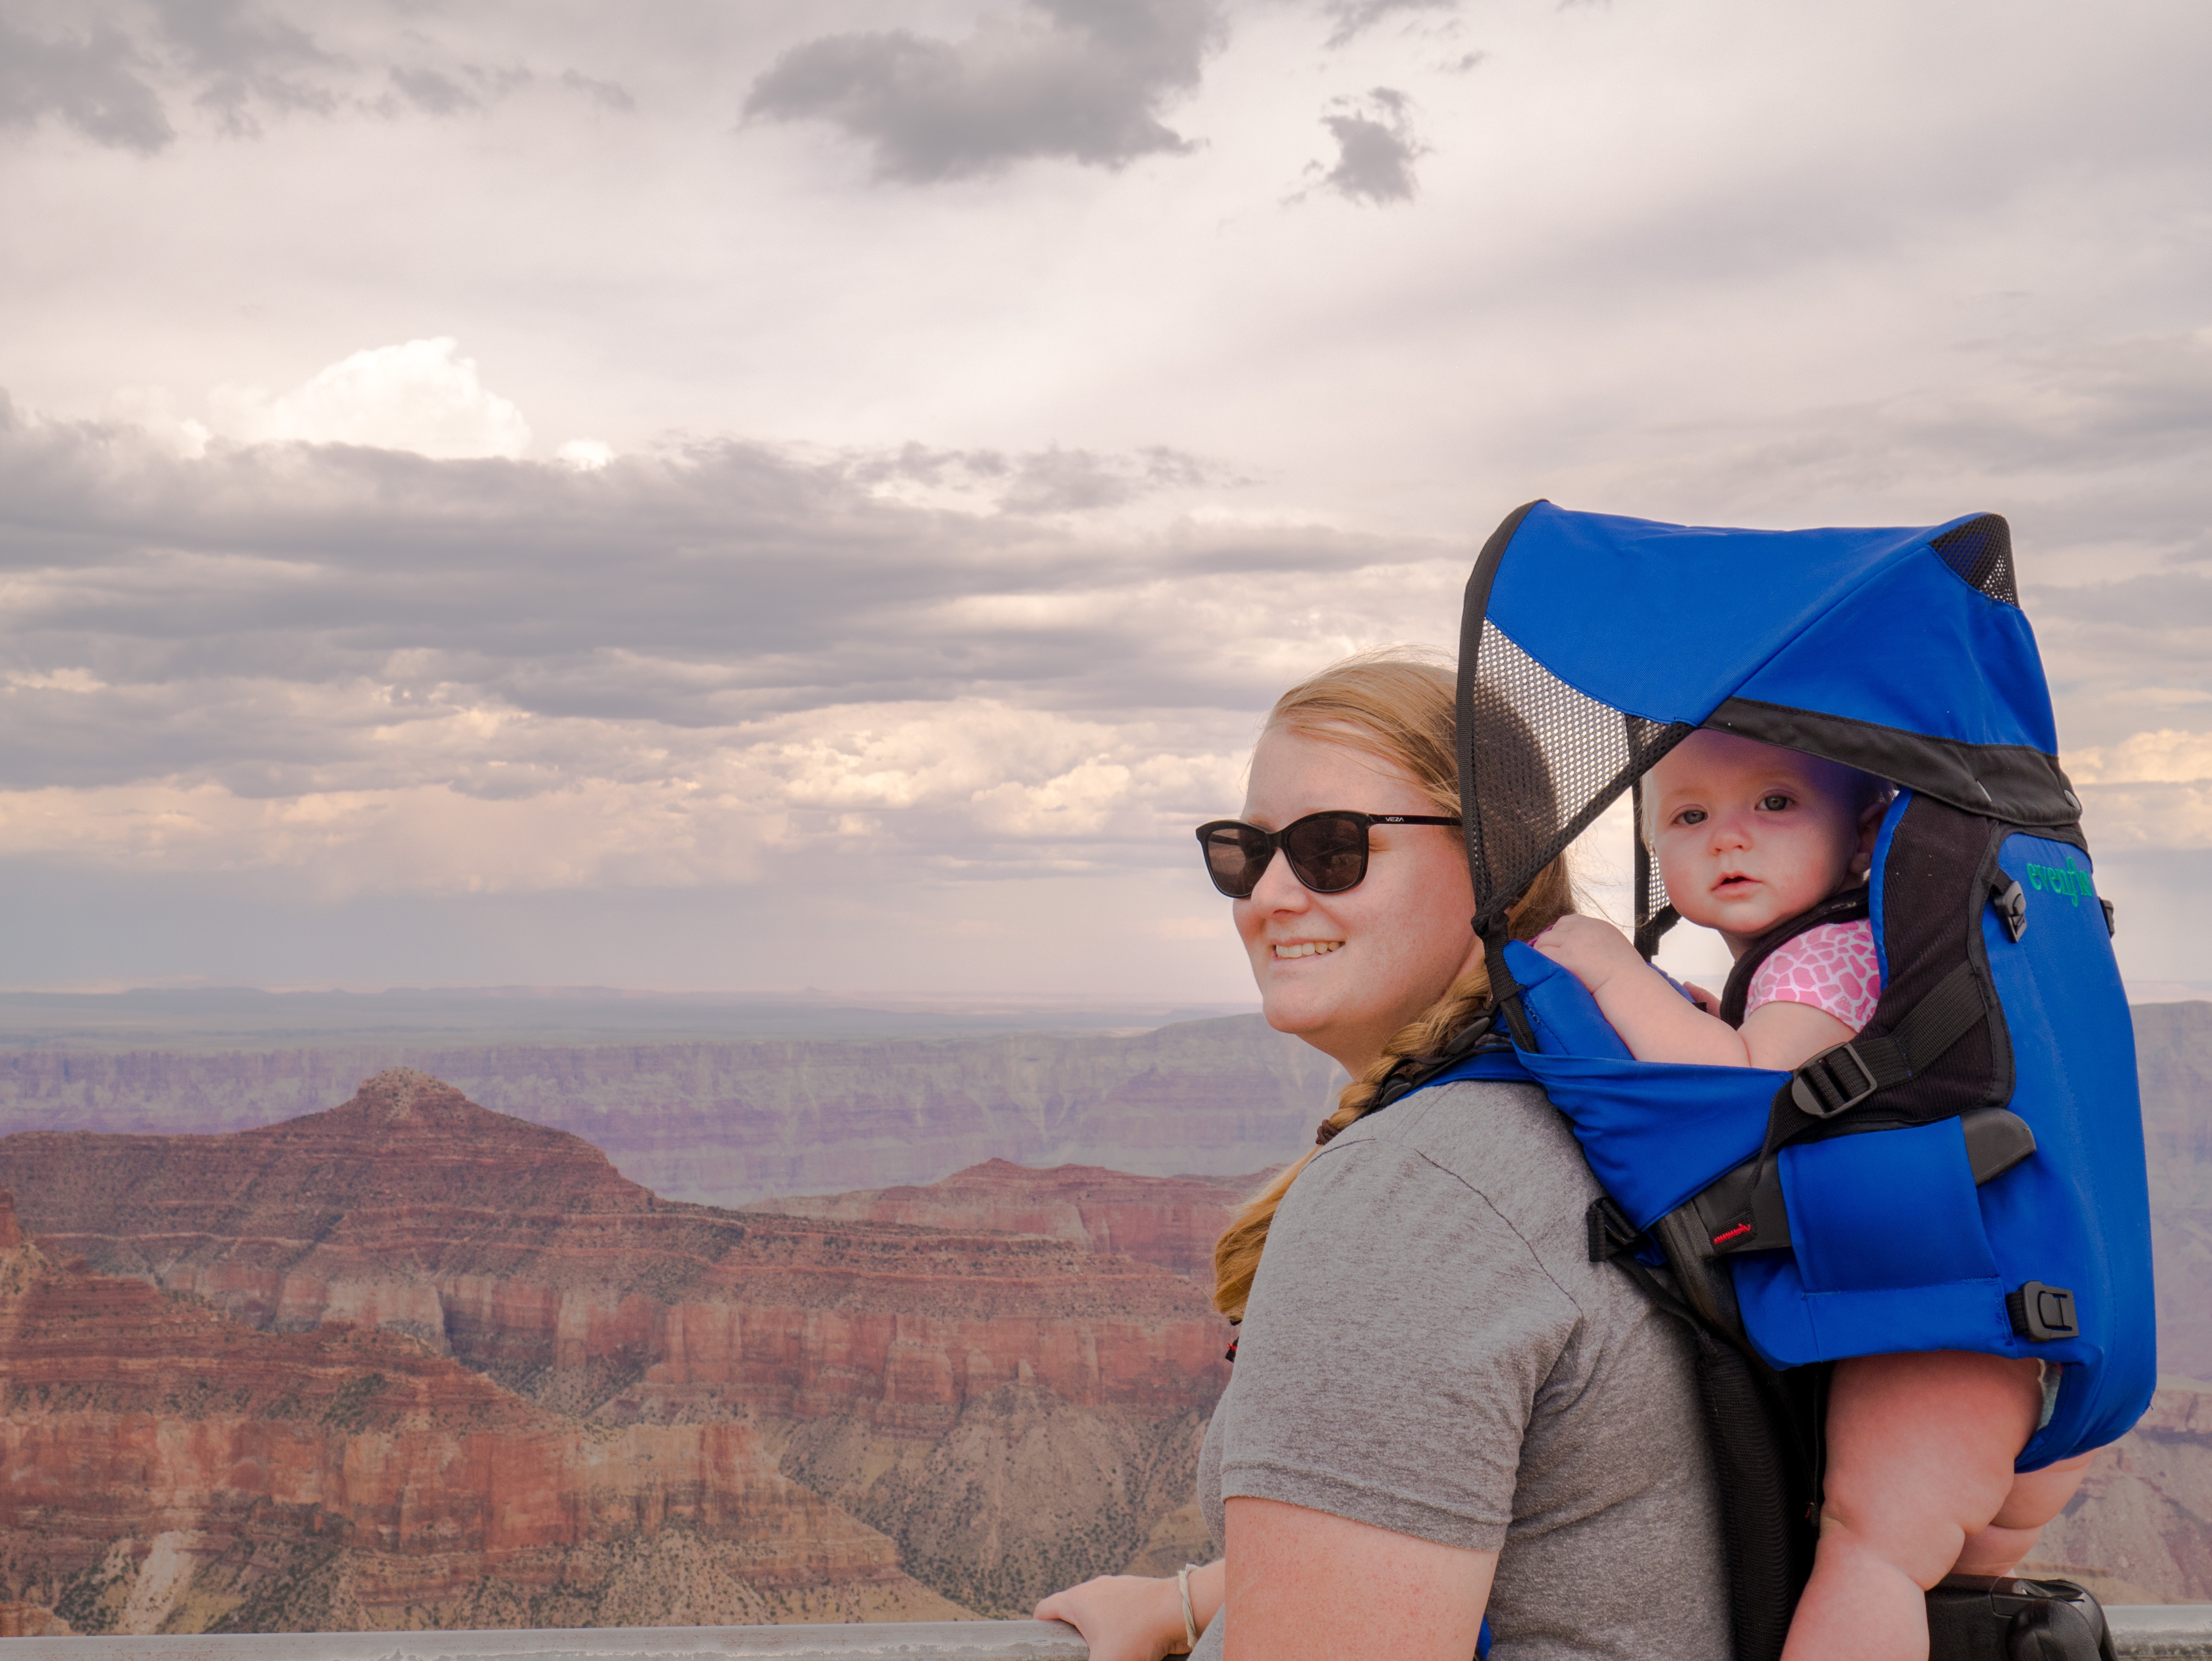 Meagan hiking with a baby at the Grand Canyon